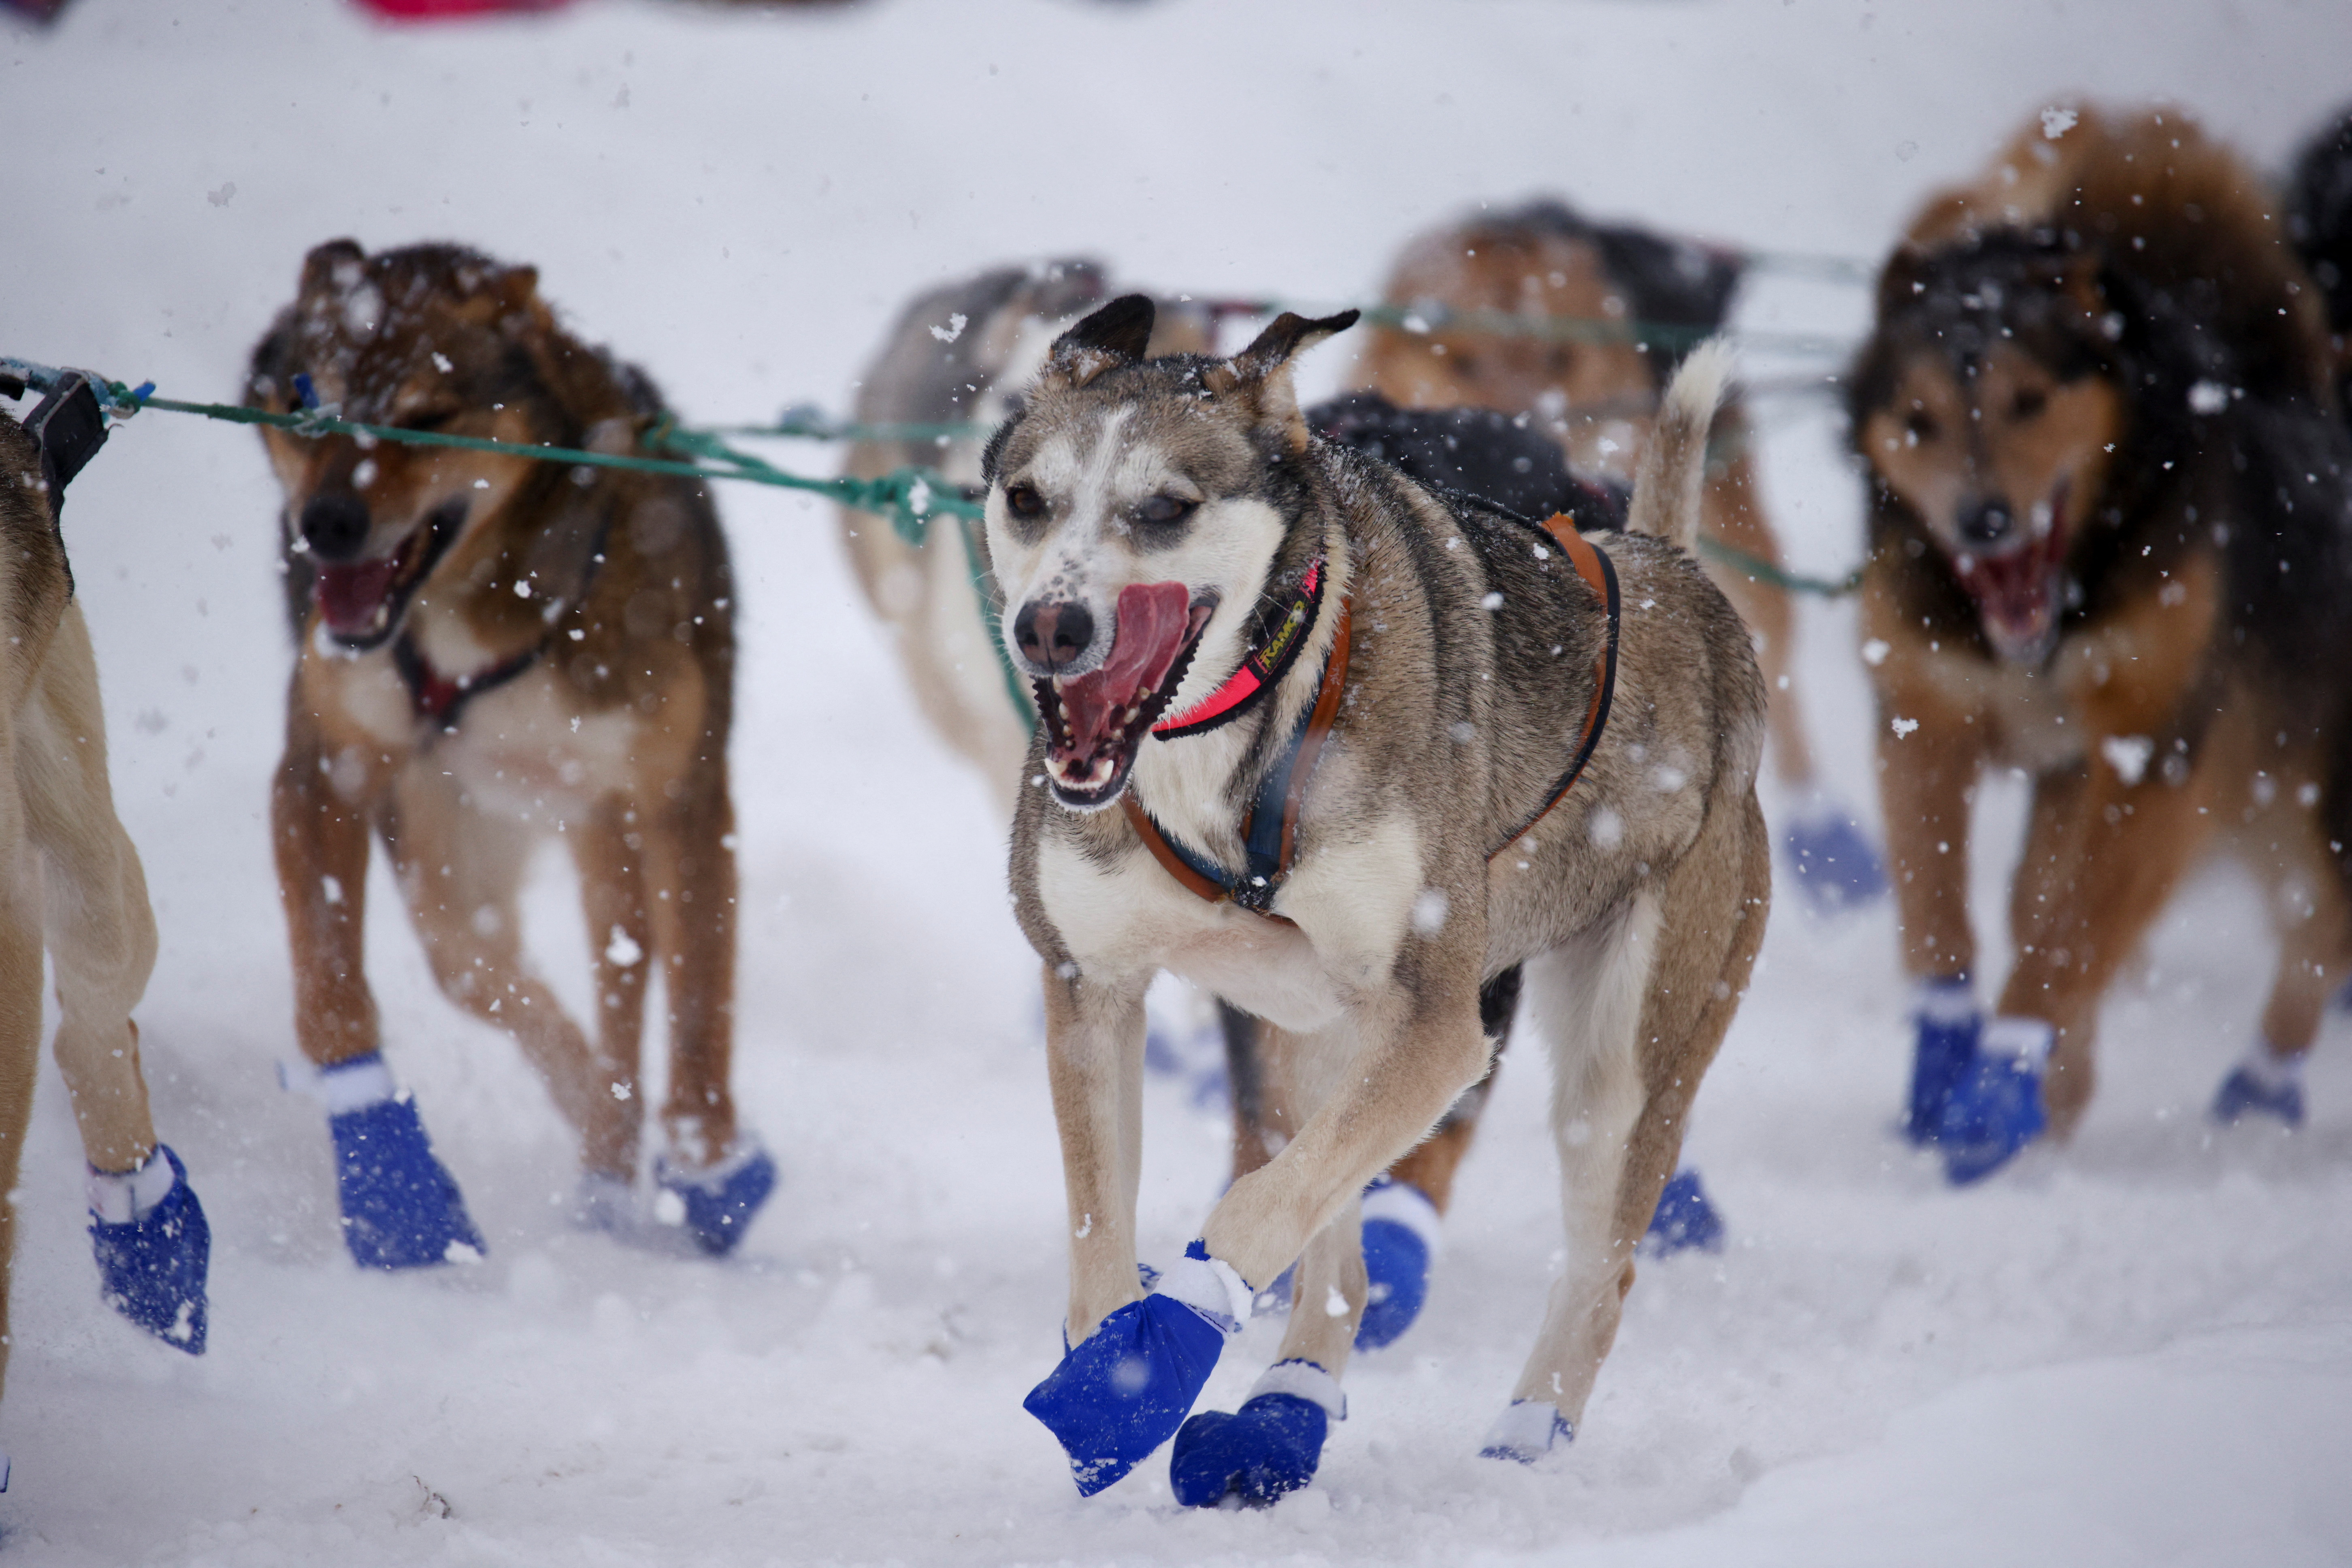 Ceremonial start of the 50th Iditarod Trail Sled Dog Race in Anchorage